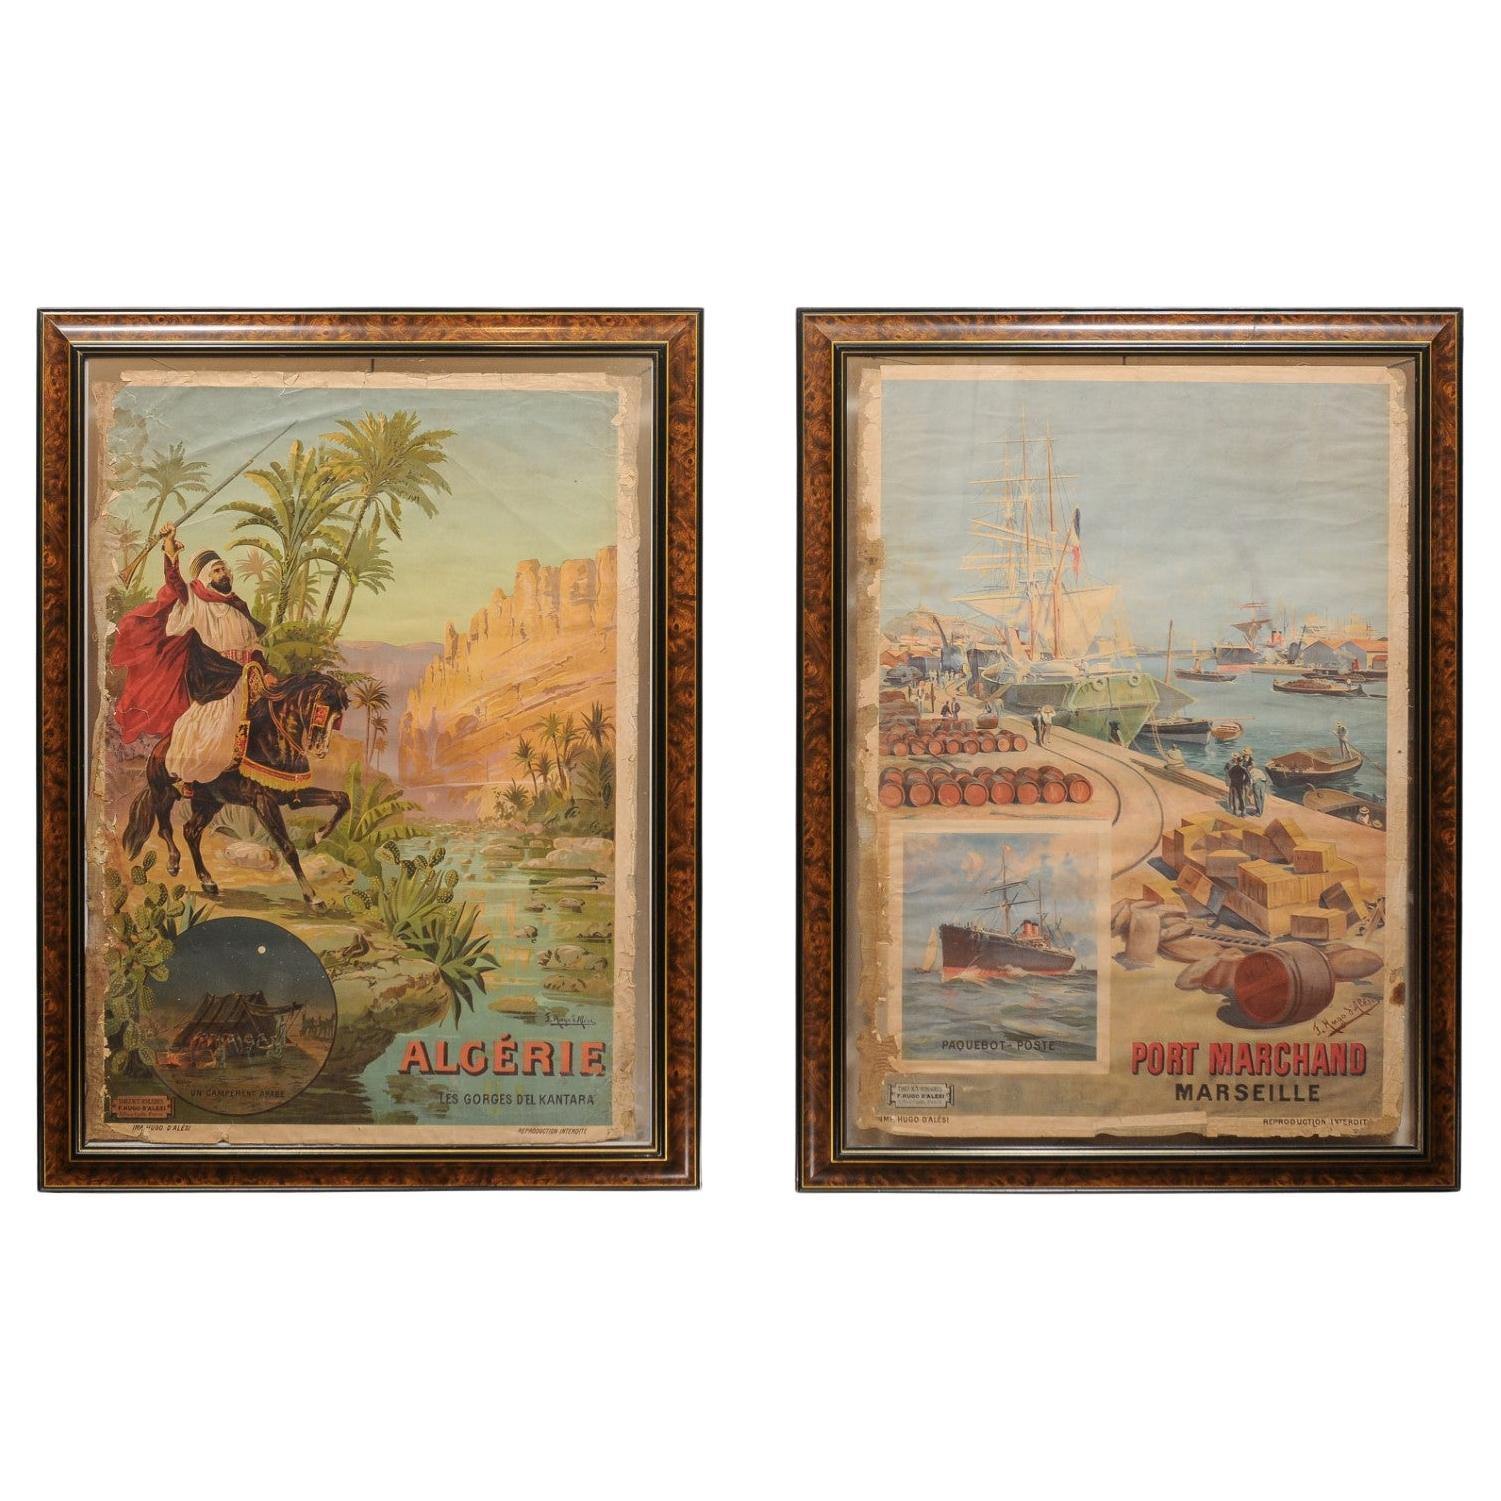 Pair of Framed Original Early 20th Century French Travel Advertisements